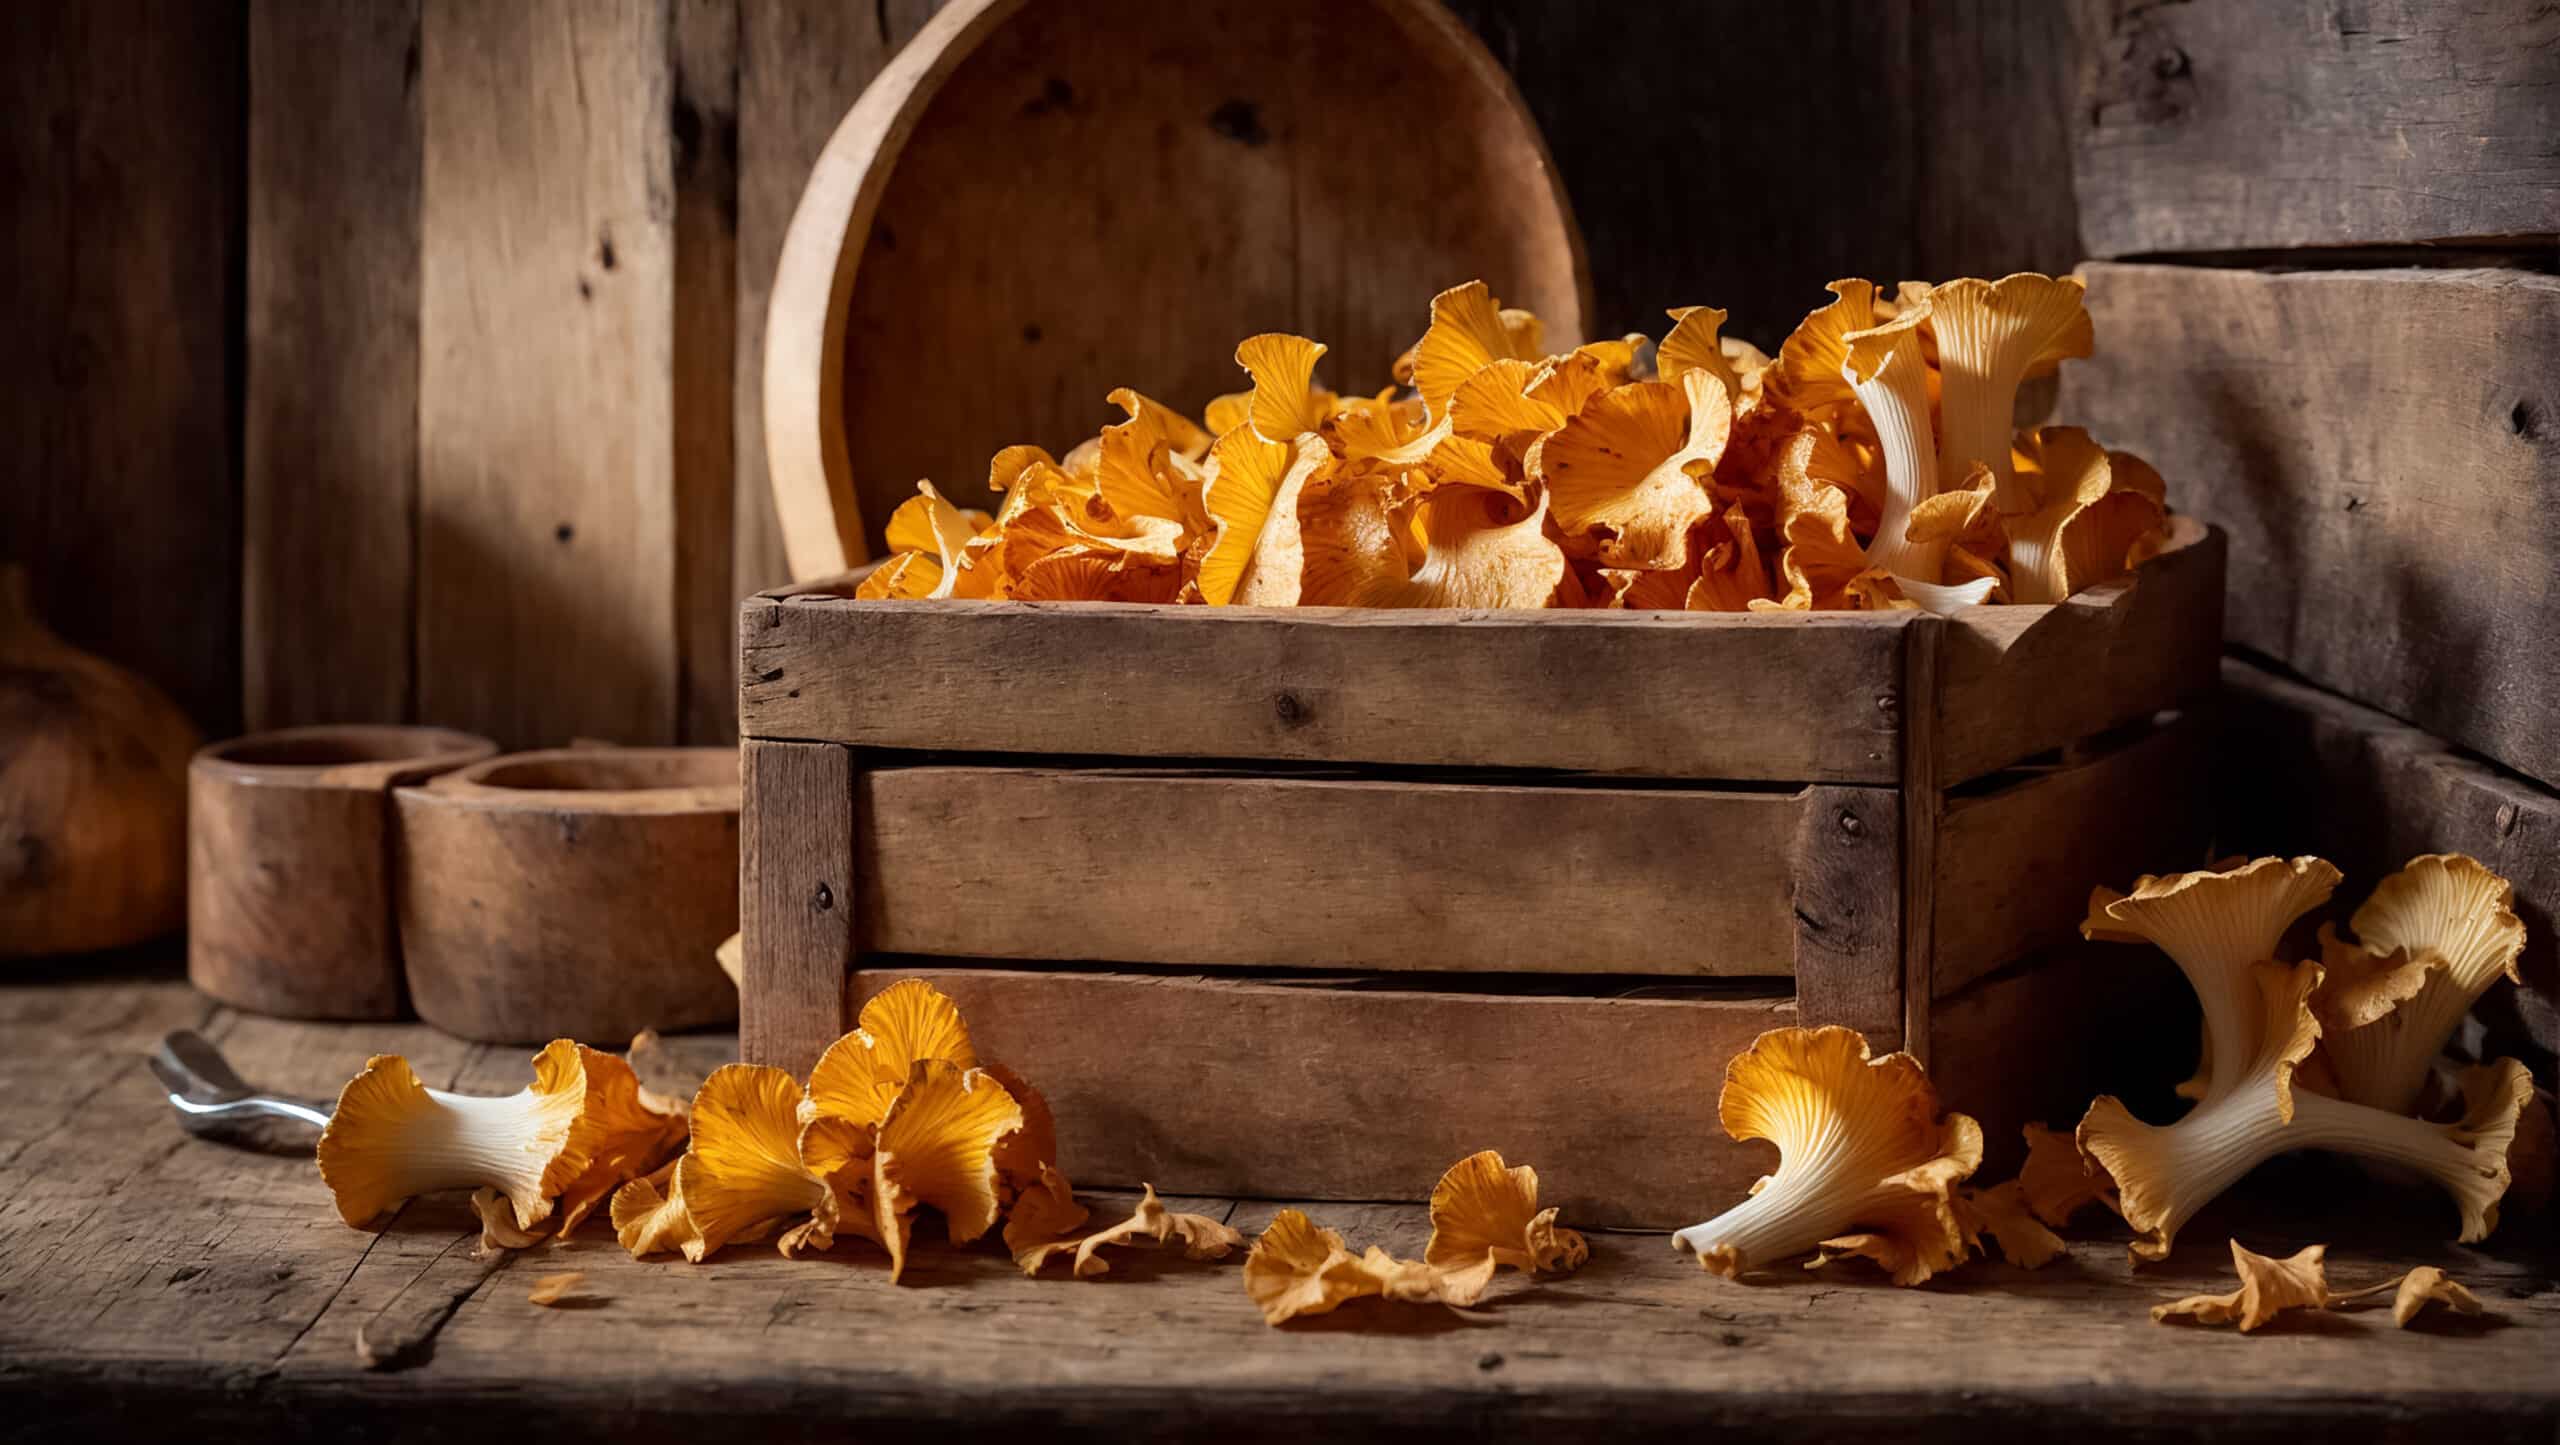 growmyownhealthfood.com : How long does chicken of the woods stay fresh?